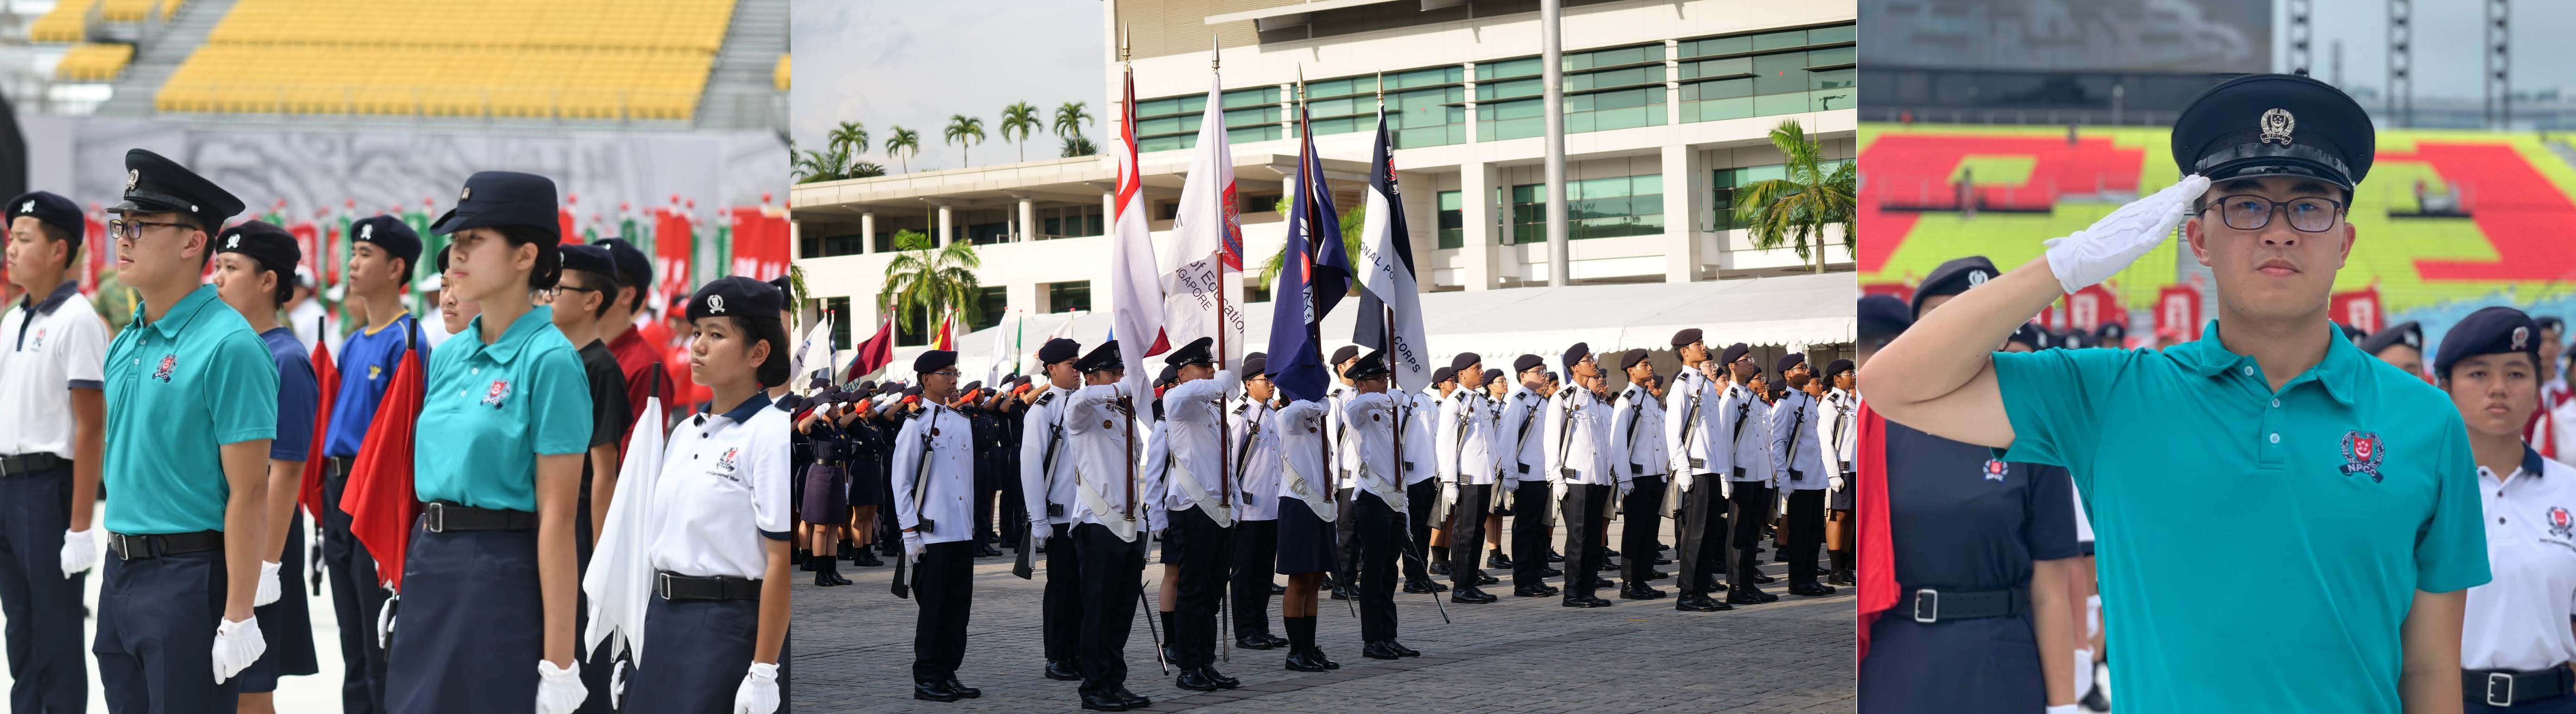 National Police Cadet Corps (NPCC) Cadet Inspectors and Honorary Officers